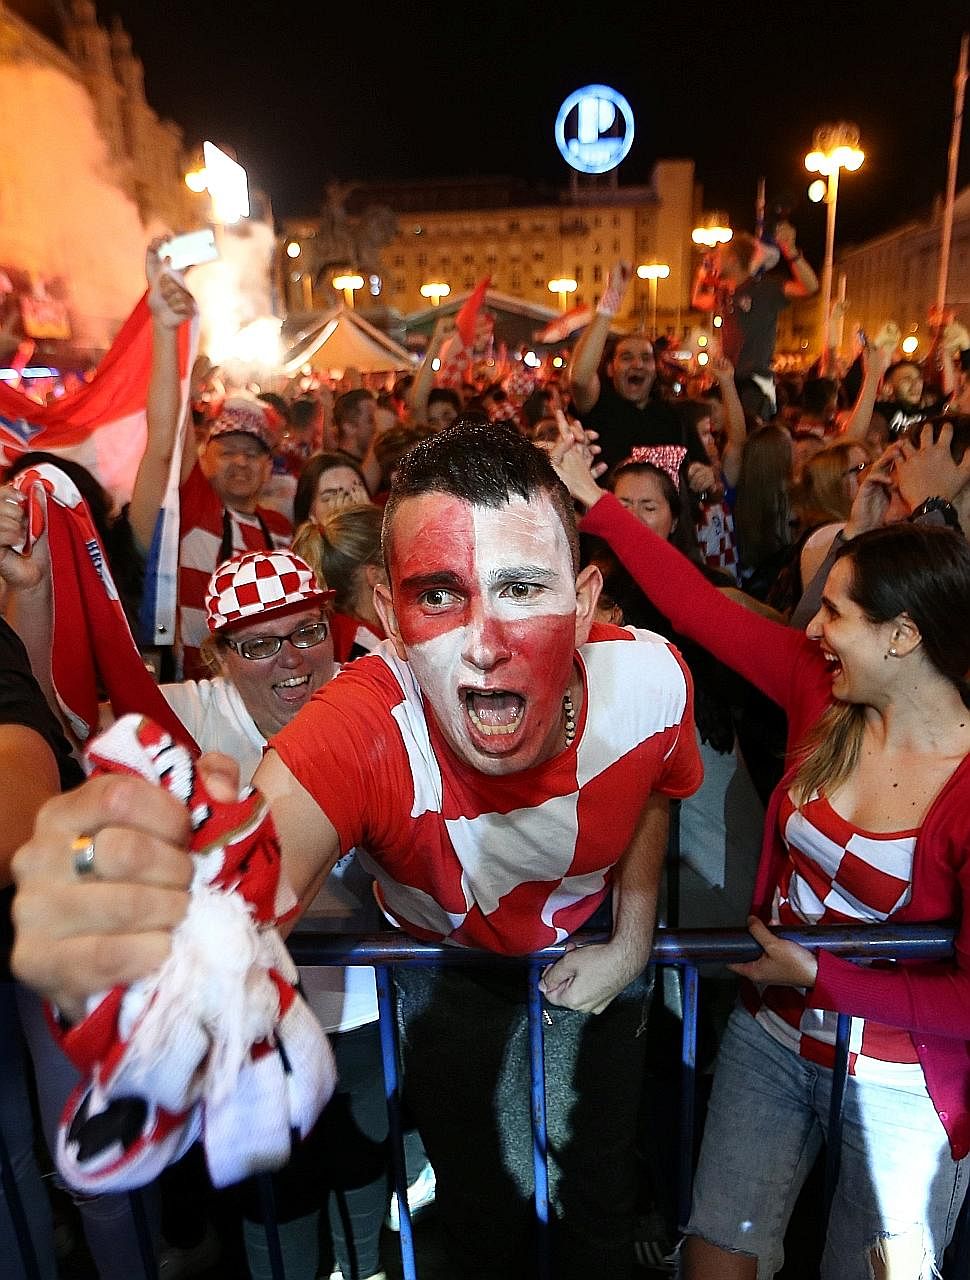 Croats painting the town red - and white - as they go wild in celebration after their country beat England 2-1 in extra time on Wednesday to qualify for the World Cup final for the first time.